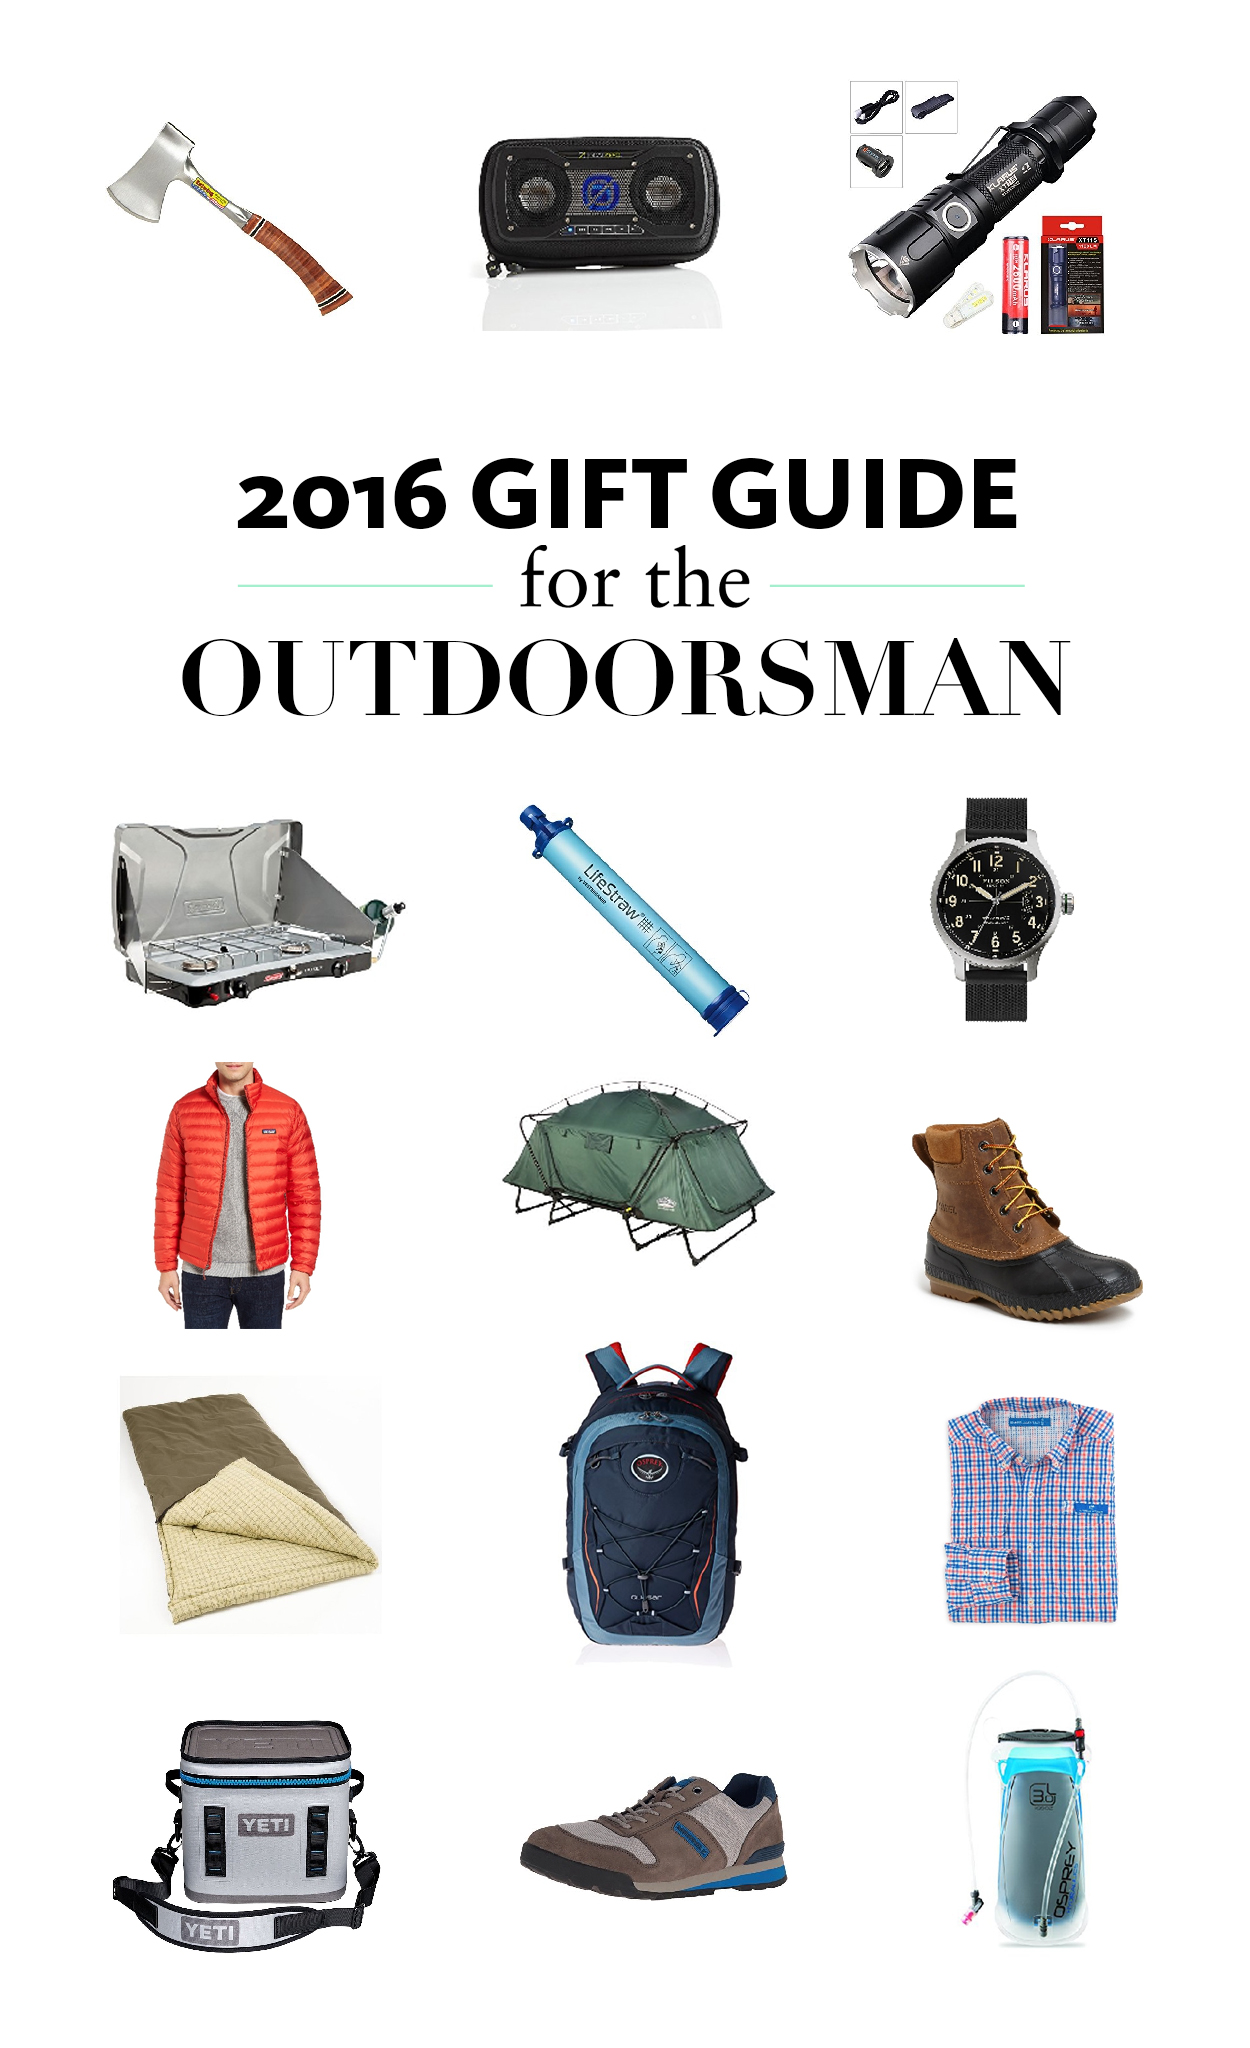 Gift guide for the hunter/outdoorsman. You will be sure to find a gift that  your special someone …